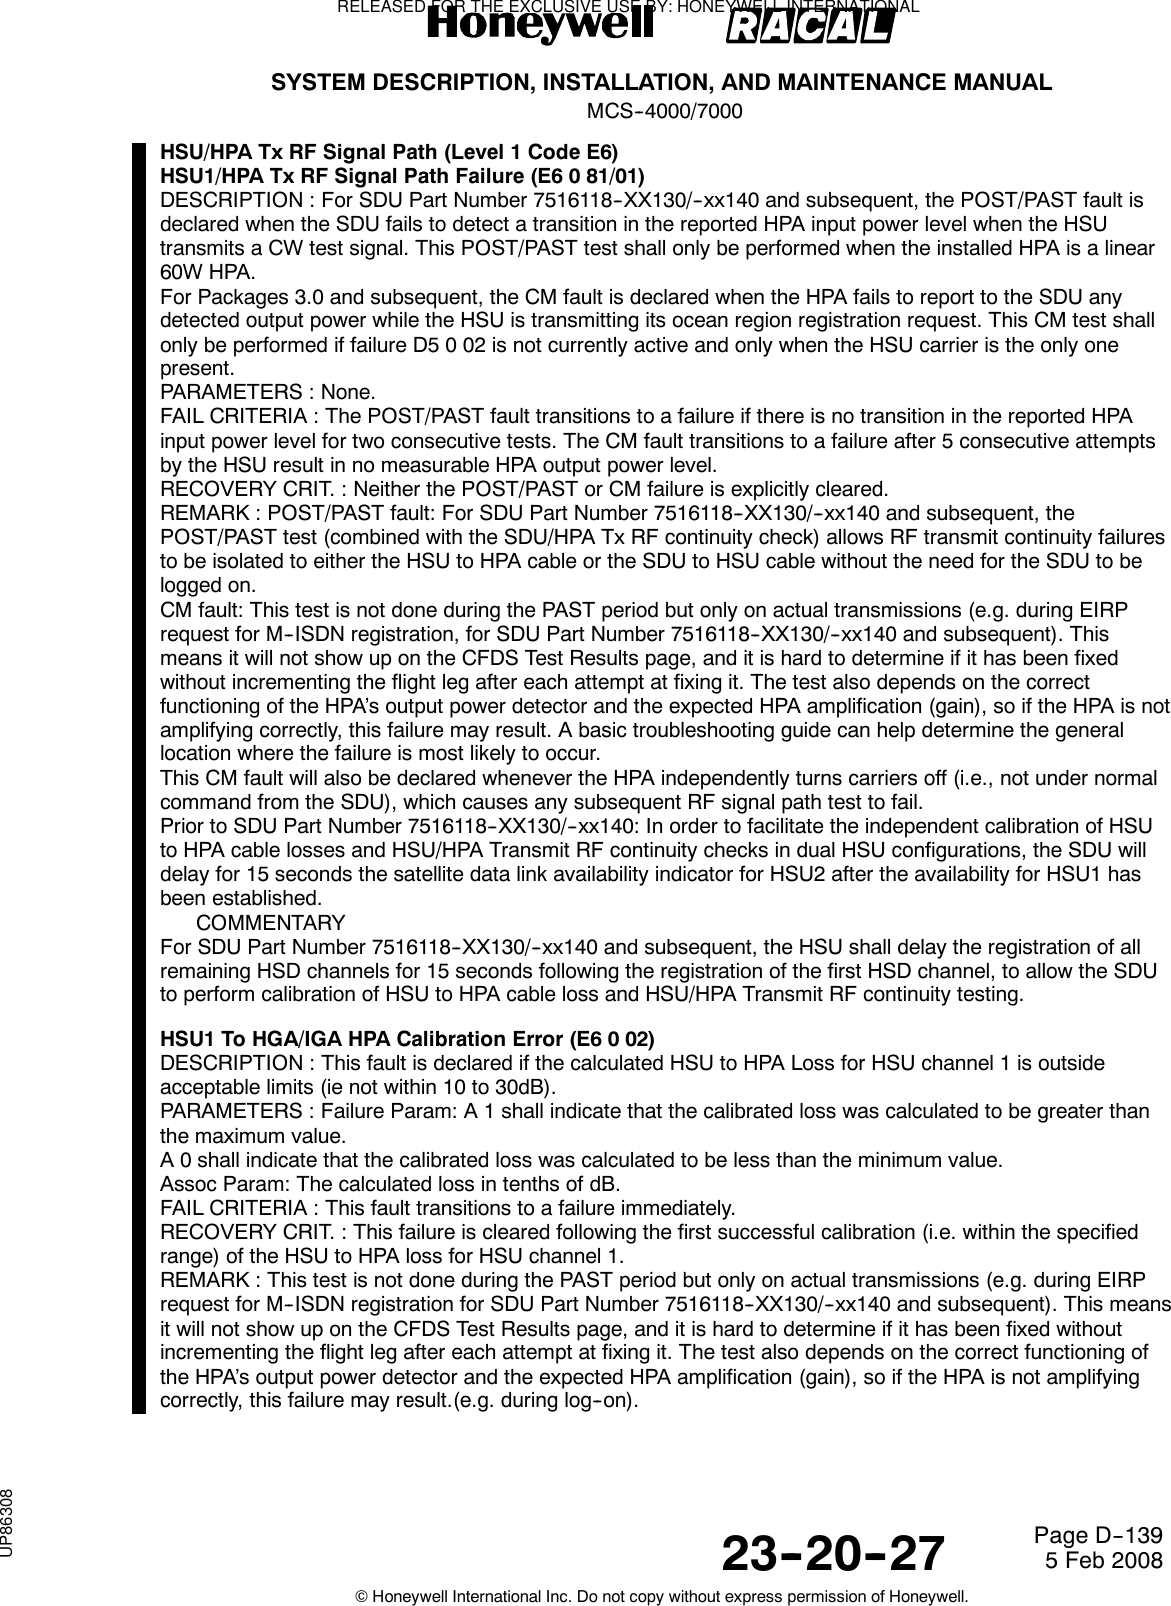 SYSTEM DESCRIPTION, INSTALLATION, AND MAINTENANCE MANUALMCS--4000/700023--20--27 5 Feb 2008©Honeywell International Inc. Do not copy without express permission of Honeywell.Page D--139HSU/HPA Tx RF Signal Path (Level 1 Code E6)HSU1/HPA Tx RF Signal Path Failure (E6 0 81/01)DESCRIPTION : For SDU Part Number 7516118--XX130/--xx140 and subsequent, the POST/PAST fault isdeclared when the SDU fails to detect a transition in the reported HPA input power level when the HSUtransmits a CW test signal. This POST/PAST test shall only be performed when the installed HPA is a linear60W HPA.For Packages 3.0 and subsequent, the CM fault is declared when the HPA fails to report to the SDU anydetected output power while the HSU is transmitting its ocean region registration request. This CM test shallonly be performed if failure D5 0 02 is not currently active and only when the HSU carrier is the only onepresent.PARAMETERS : None.FAIL CRITERIA : The POST/PAST fault transitions to a failure if there is no transition in the reported HPAinput power level for two consecutive tests. The CM fault transitions to a failure after 5 consecutive attemptsby the HSU result in no measurable HPA output power level.RECOVERY CRIT. : Neither the POST/PAST or CM failure is explicitly cleared.REMARK : POST/PAST fault: For SDU Part Number 7516118--XX130/--xx140 and subsequent, thePOST/PAST test (combined with the SDU/HPA Tx RF continuity check) allows RF transmit continuity failuresto be isolated to either the HSU to HPA cable or the SDU to HSU cable without the need for the SDU to belogged on.CM fault: This test is not done during the PAST period but only on actual transmissions (e.g. during EIRPrequest for M--ISDN registration, for SDU Part Number 7516118--XX130/--xx140 and subsequent). Thismeans it will not show up on the CFDS Test Results page, and it is hard to determine if it has been fixedwithout incrementing the flight leg after each attempt at fixing it. The test also depends on the correctfunctioning of the HPA’s output power detector and the expected HPA amplification (gain), so if the HPA is notamplifying correctly, this failure may result. A basic troubleshooting guide can help determine the generallocation where the failure is most likely to occur.This CM fault will also be declared whenever the HPA independently turns carriers off (i.e., not under normalcommand from the SDU), which causes any subsequent RF signal path test to fail.Prior to SDU Part Number 7516118--XX130/--xx140: In order to facilitate the independent calibration of HSUto HPA cable losses and HSU/HPA Transmit RF continuity checks in dual HSU configurations, the SDU willdelay for 15 seconds the satellite data link availability indicator for HSU2 after the availability for HSU1 hasbeen established.COMMENTARYFor SDU Part Number 7516118--XX130/--xx140 and subsequent, the HSU shall delay the registration of allremaining HSD channels for 15 seconds following the registration of the first HSD channel, to allow the SDUto perform calibration of HSU to HPA cable loss and HSU/HPA Transmit RF continuity testing.HSU1 To HGA/IGA HPA Calibration Error (E6 0 02)DESCRIPTION : This fault is declared if the calculated HSU to HPA Loss for HSU channel 1 is outsideacceptable limits (ie not within 10 to 30dB).PARAMETERS : Failure Param: A 1 shall indicate that the calibrated loss was calculated to be greater thanthe maximum value.A 0 shall indicate that the calibrated loss was calculated to be less than the minimum value.Assoc Param: The calculated loss in tenths of dB.FAIL CRITERIA : This fault transitions to a failure immediately.RECOVERY CRIT. : This failure is cleared following the first successful calibration (i.e. within the specifiedrange) of the HSU to HPA loss for HSU channel 1.REMARK : This test is not done during the PAST period but only on actual transmissions (e.g. during EIRPrequest for M--ISDN registration for SDU Part Number 7516118--XX130/--xx140 and subsequent). This meansit will not show up on the CFDS Test Results page, and it is hard to determine if it has been fixed withoutincrementing the flight leg after each attempt at fixing it. The test also depends on the correct functioning ofthe HPA’s output power detector and the expected HPA amplification (gain), so if the HPA is not amplifyingcorrectly, this failure may result.(e.g. during log--on).RELEASED FOR THE EXCLUSIVE USE BY: HONEYWELL INTERNATIONALUP86308